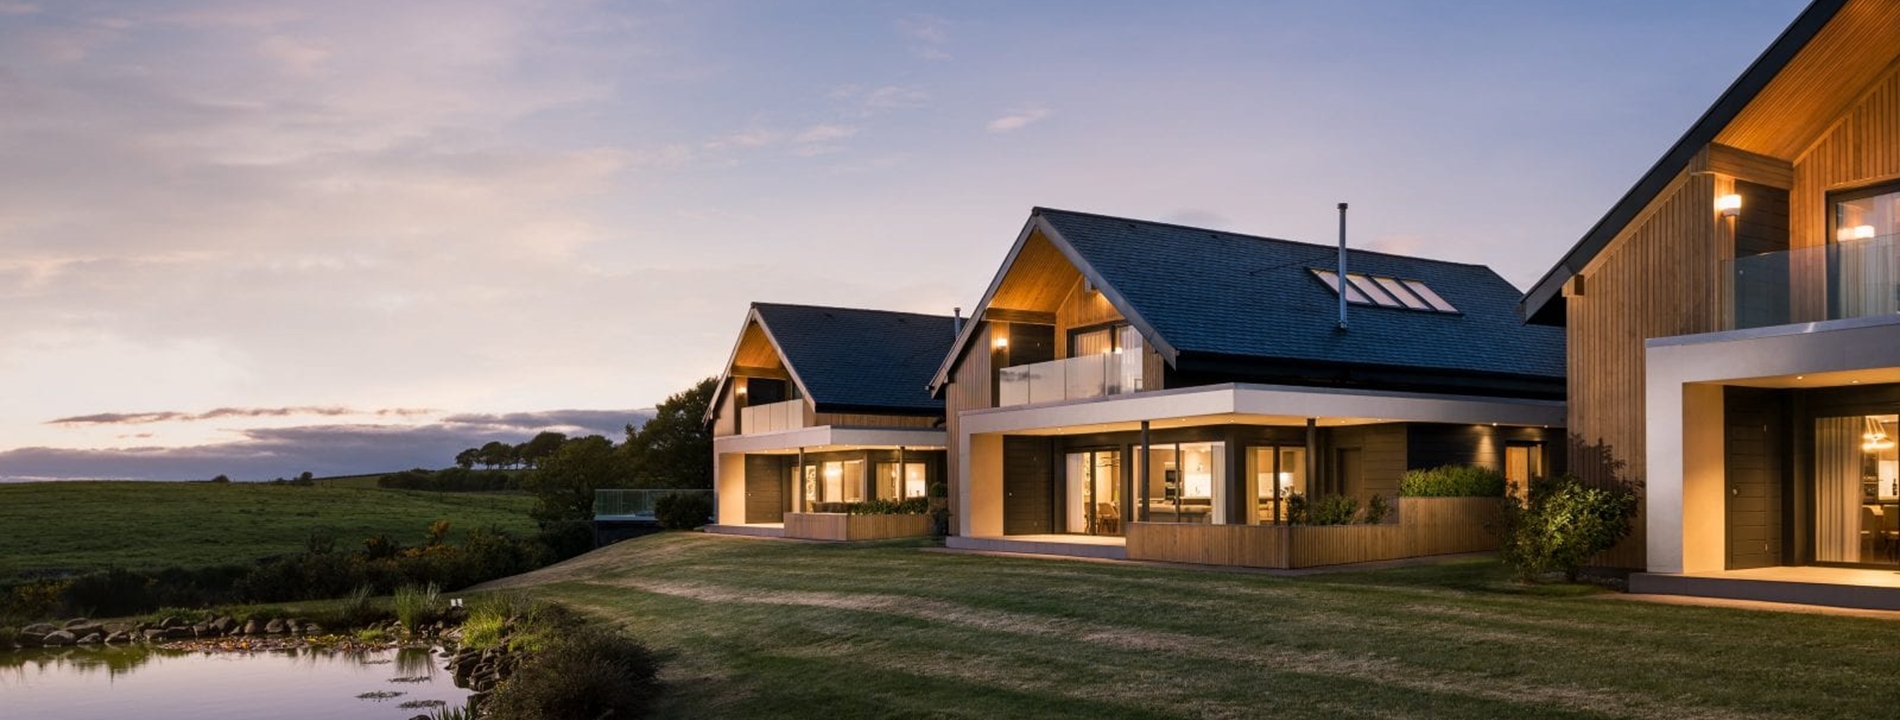 A panoramic view of the Lochside lodges at dusk.